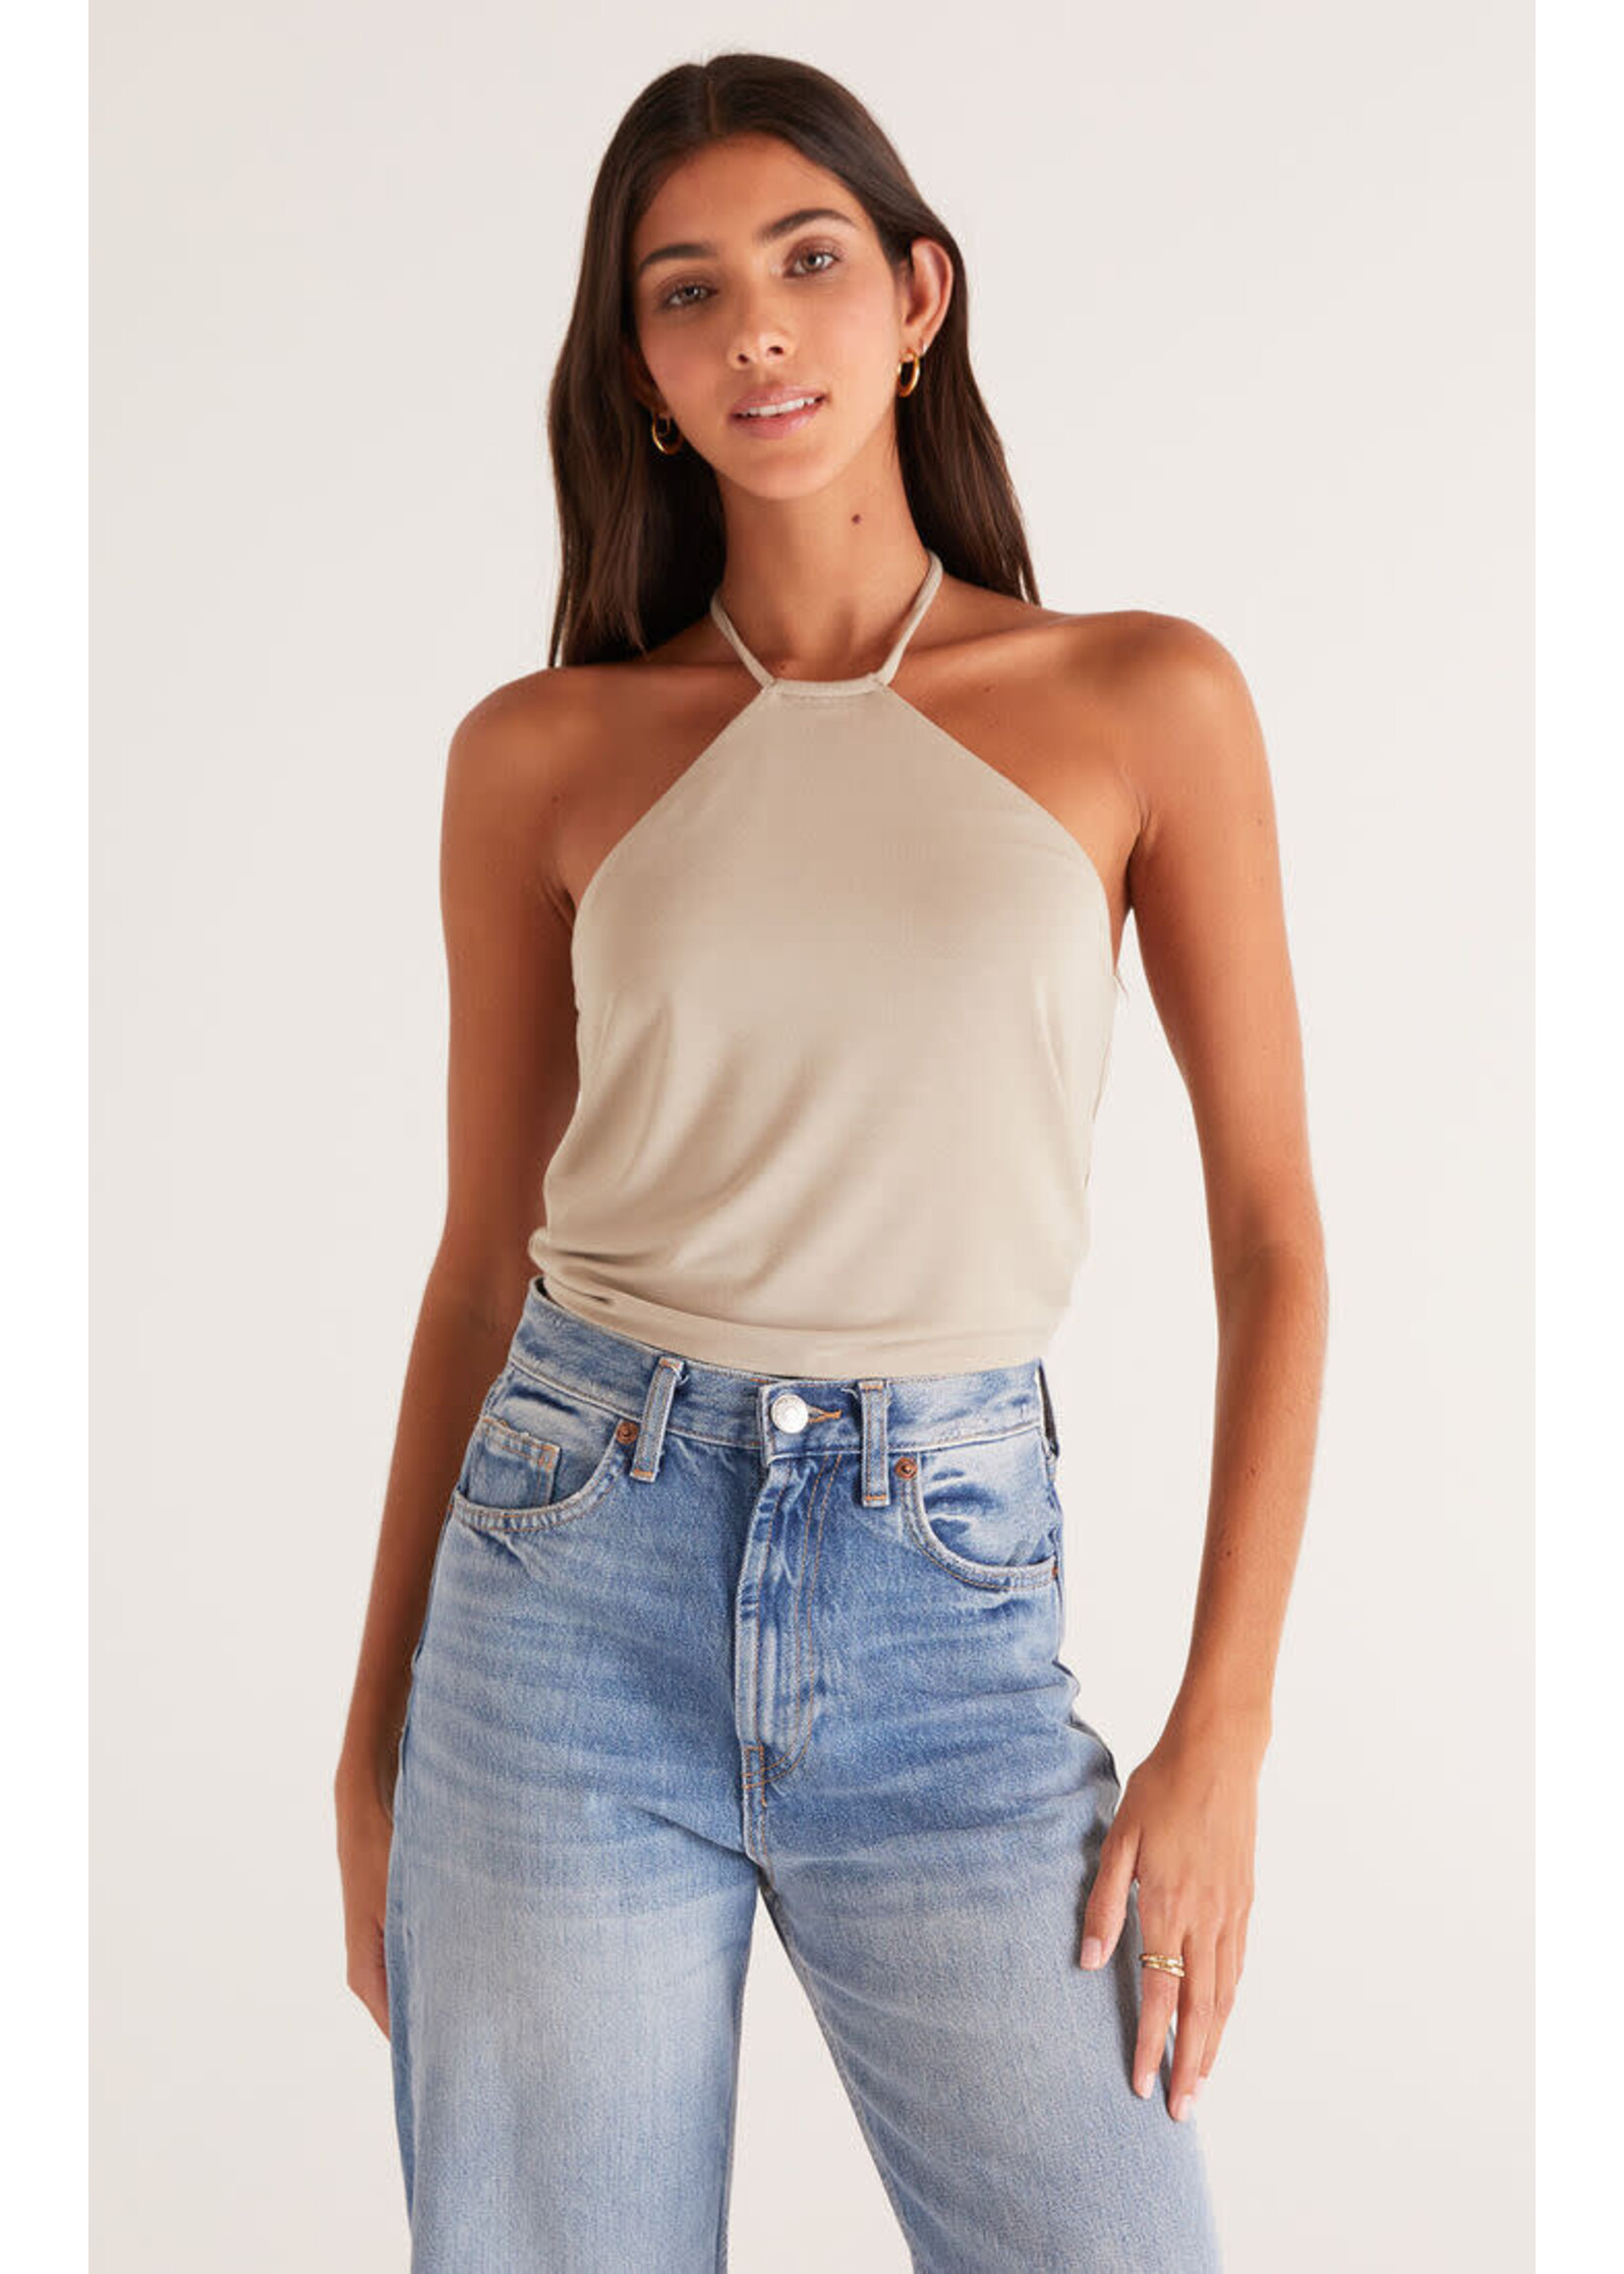 ZS Olivia Date Top - Wink Boutiques